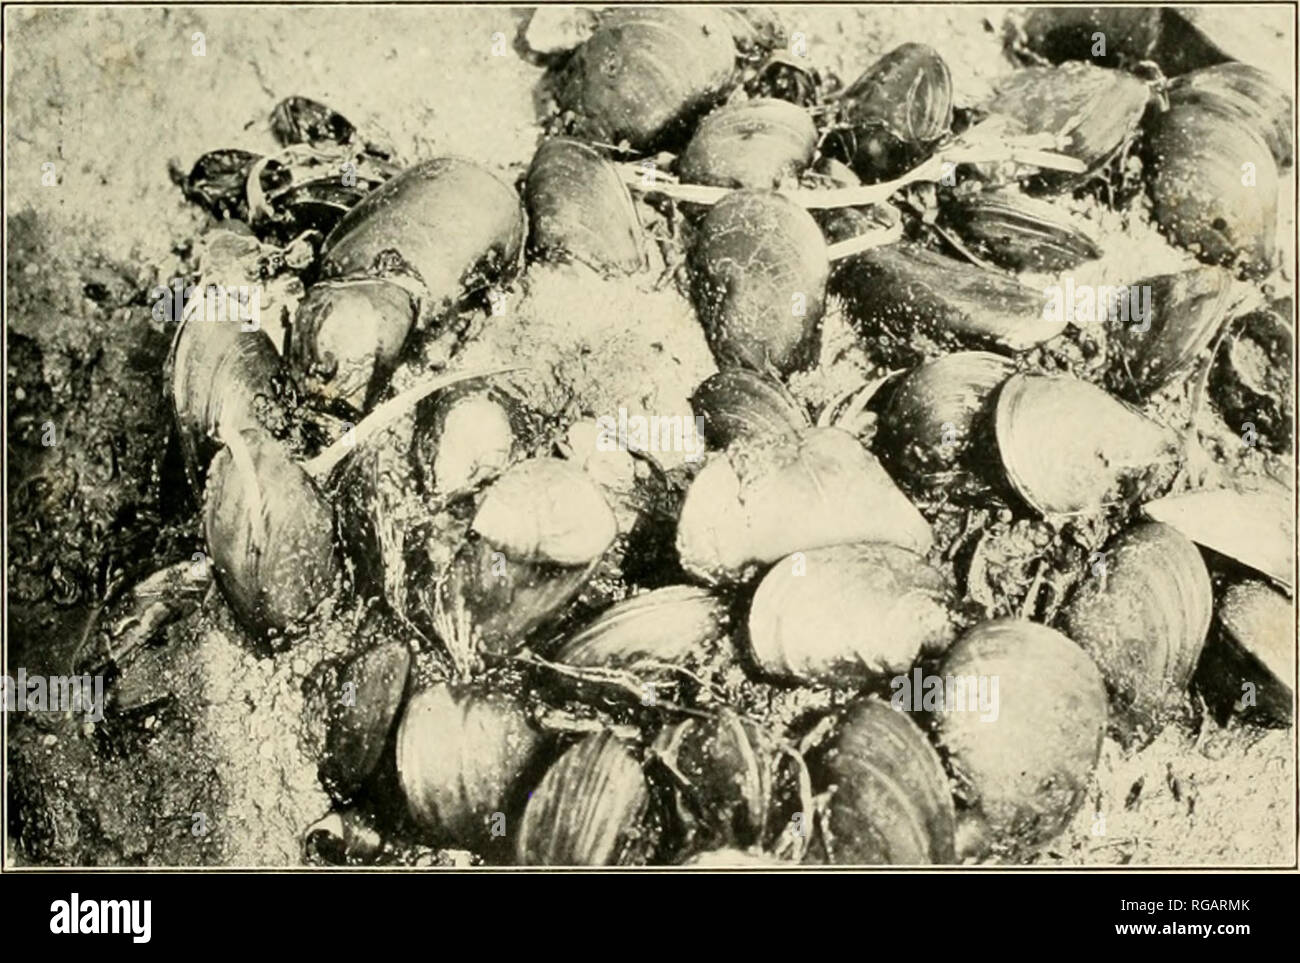 . Bulletin of the United States Fish Commission. Fisheries -- United States; Fish-culture -- United States. Fig. 2o5.—A crimp of living mussels whose shells are encrusted with Bryozoa, barnacles, sea anemonies, ami serpulids. Fui. 207.—Vertical view oJ mussels on a natural lied, showing the characteristic position they assume with the anterior end buried in the sand and the posterior or syphon end projecting well above the level oi the bottom.. Please note that these images are extracted from scanned page images that may have been digitally enhanced for readability - coloration and appearance  Stock Photo